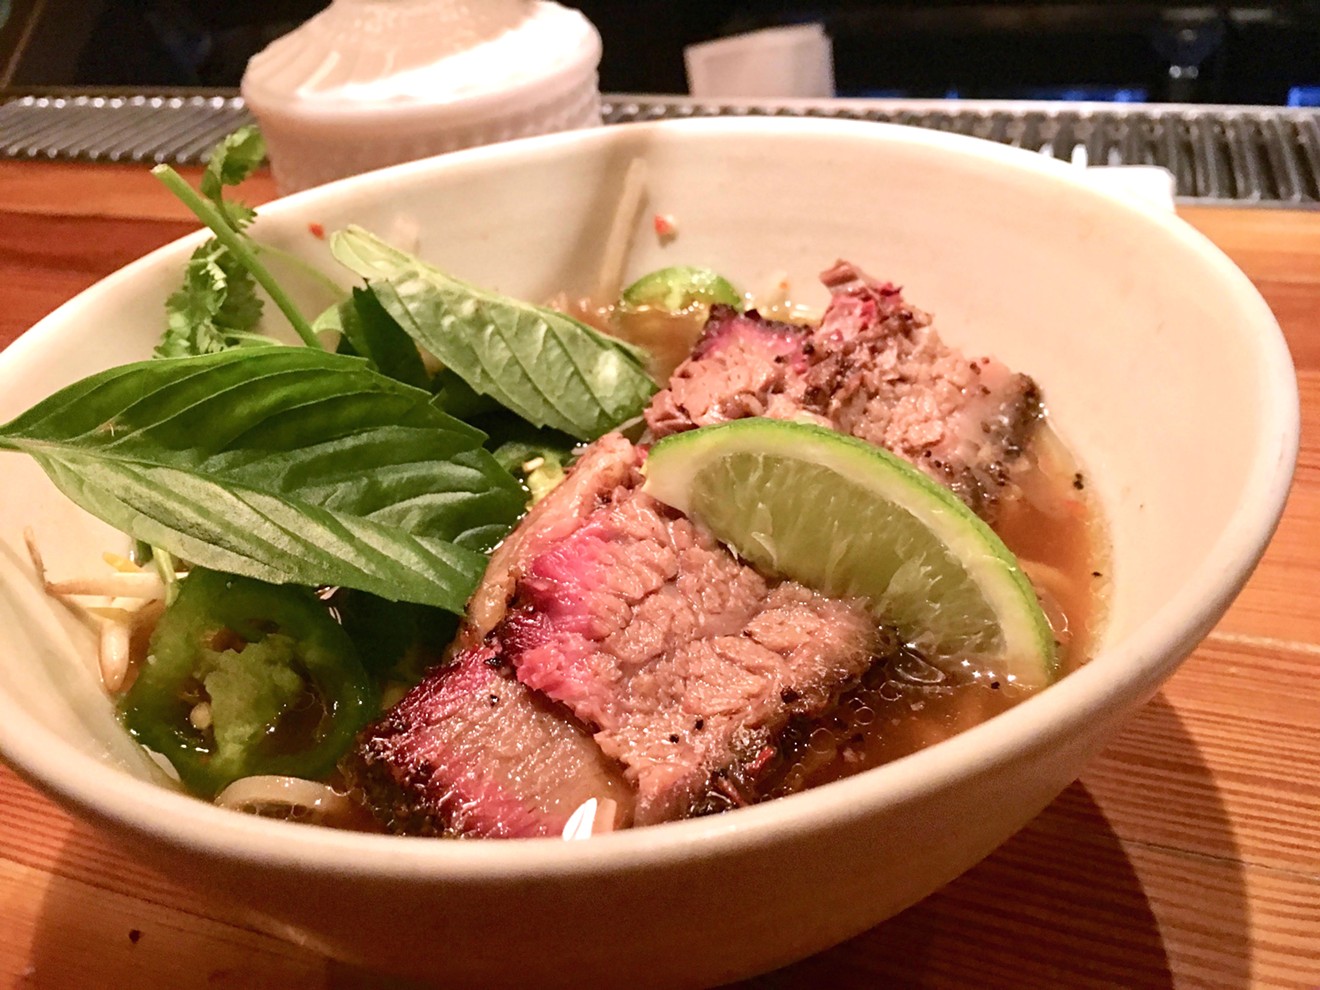 A bowl of Aaron Franklin's brisket in a flurry of broth and herbs set diners back $17 and an hour wait, but Dallas diners seemed more than happy to try the Austin pitmaster's goods at Top Knot's Uncommon Ramen series.